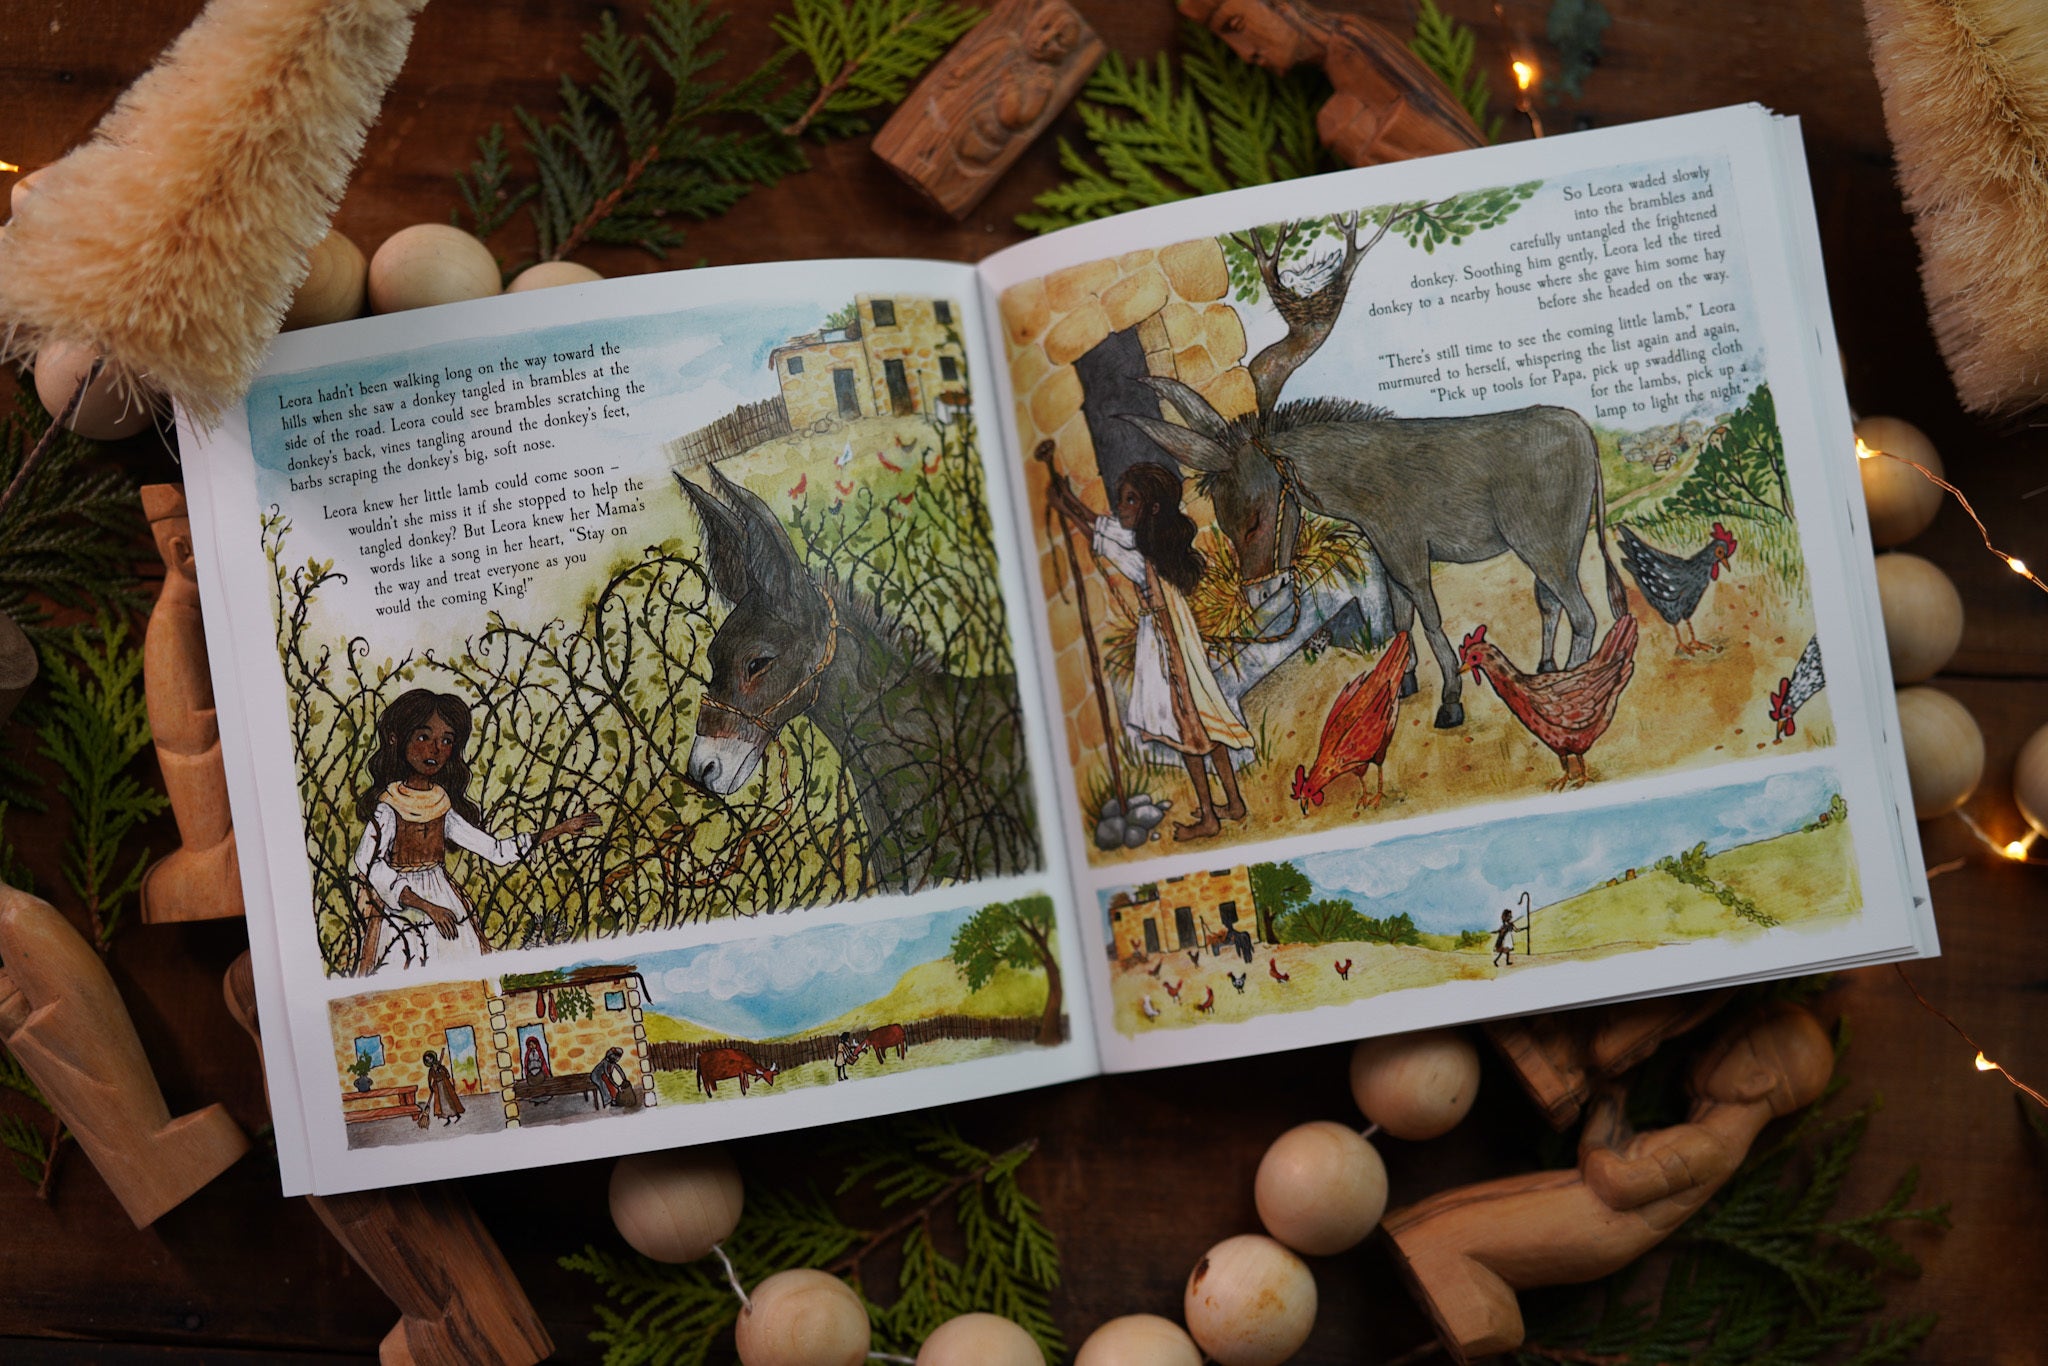 The Light Gift - A Messiah Manger Storybook